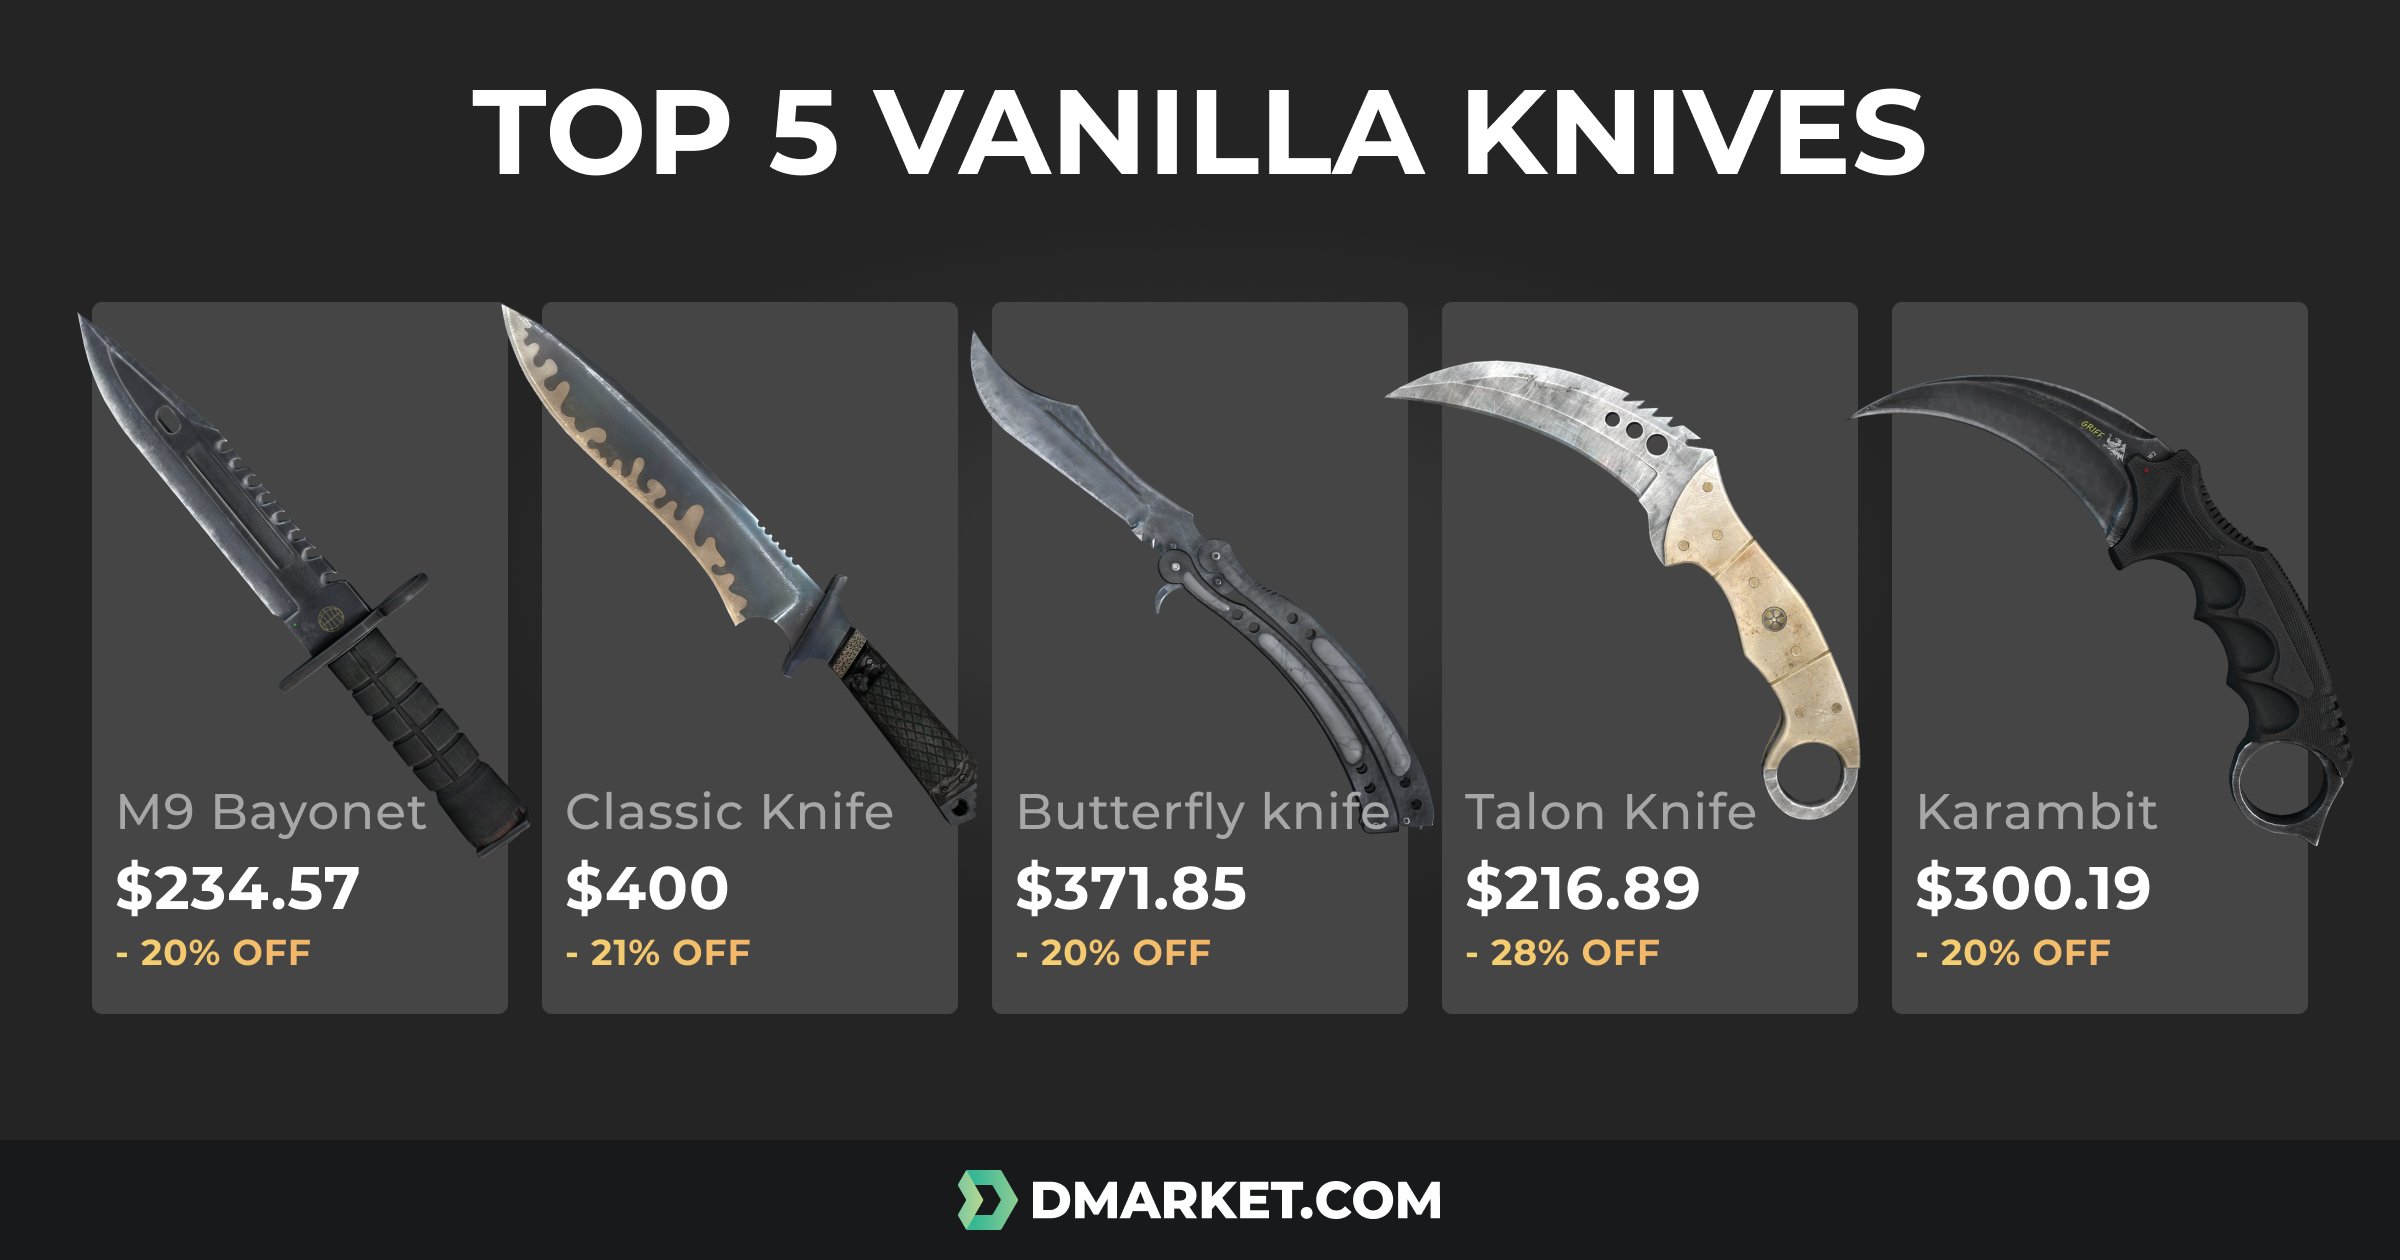 der enkel krabbe DMarket on Twitter: "Vanilla knives in #CSGO have no patterns, look clean  and nice. Their float value doesn't affect their appearance. This is why a  lot of gamers choose these skins. Do